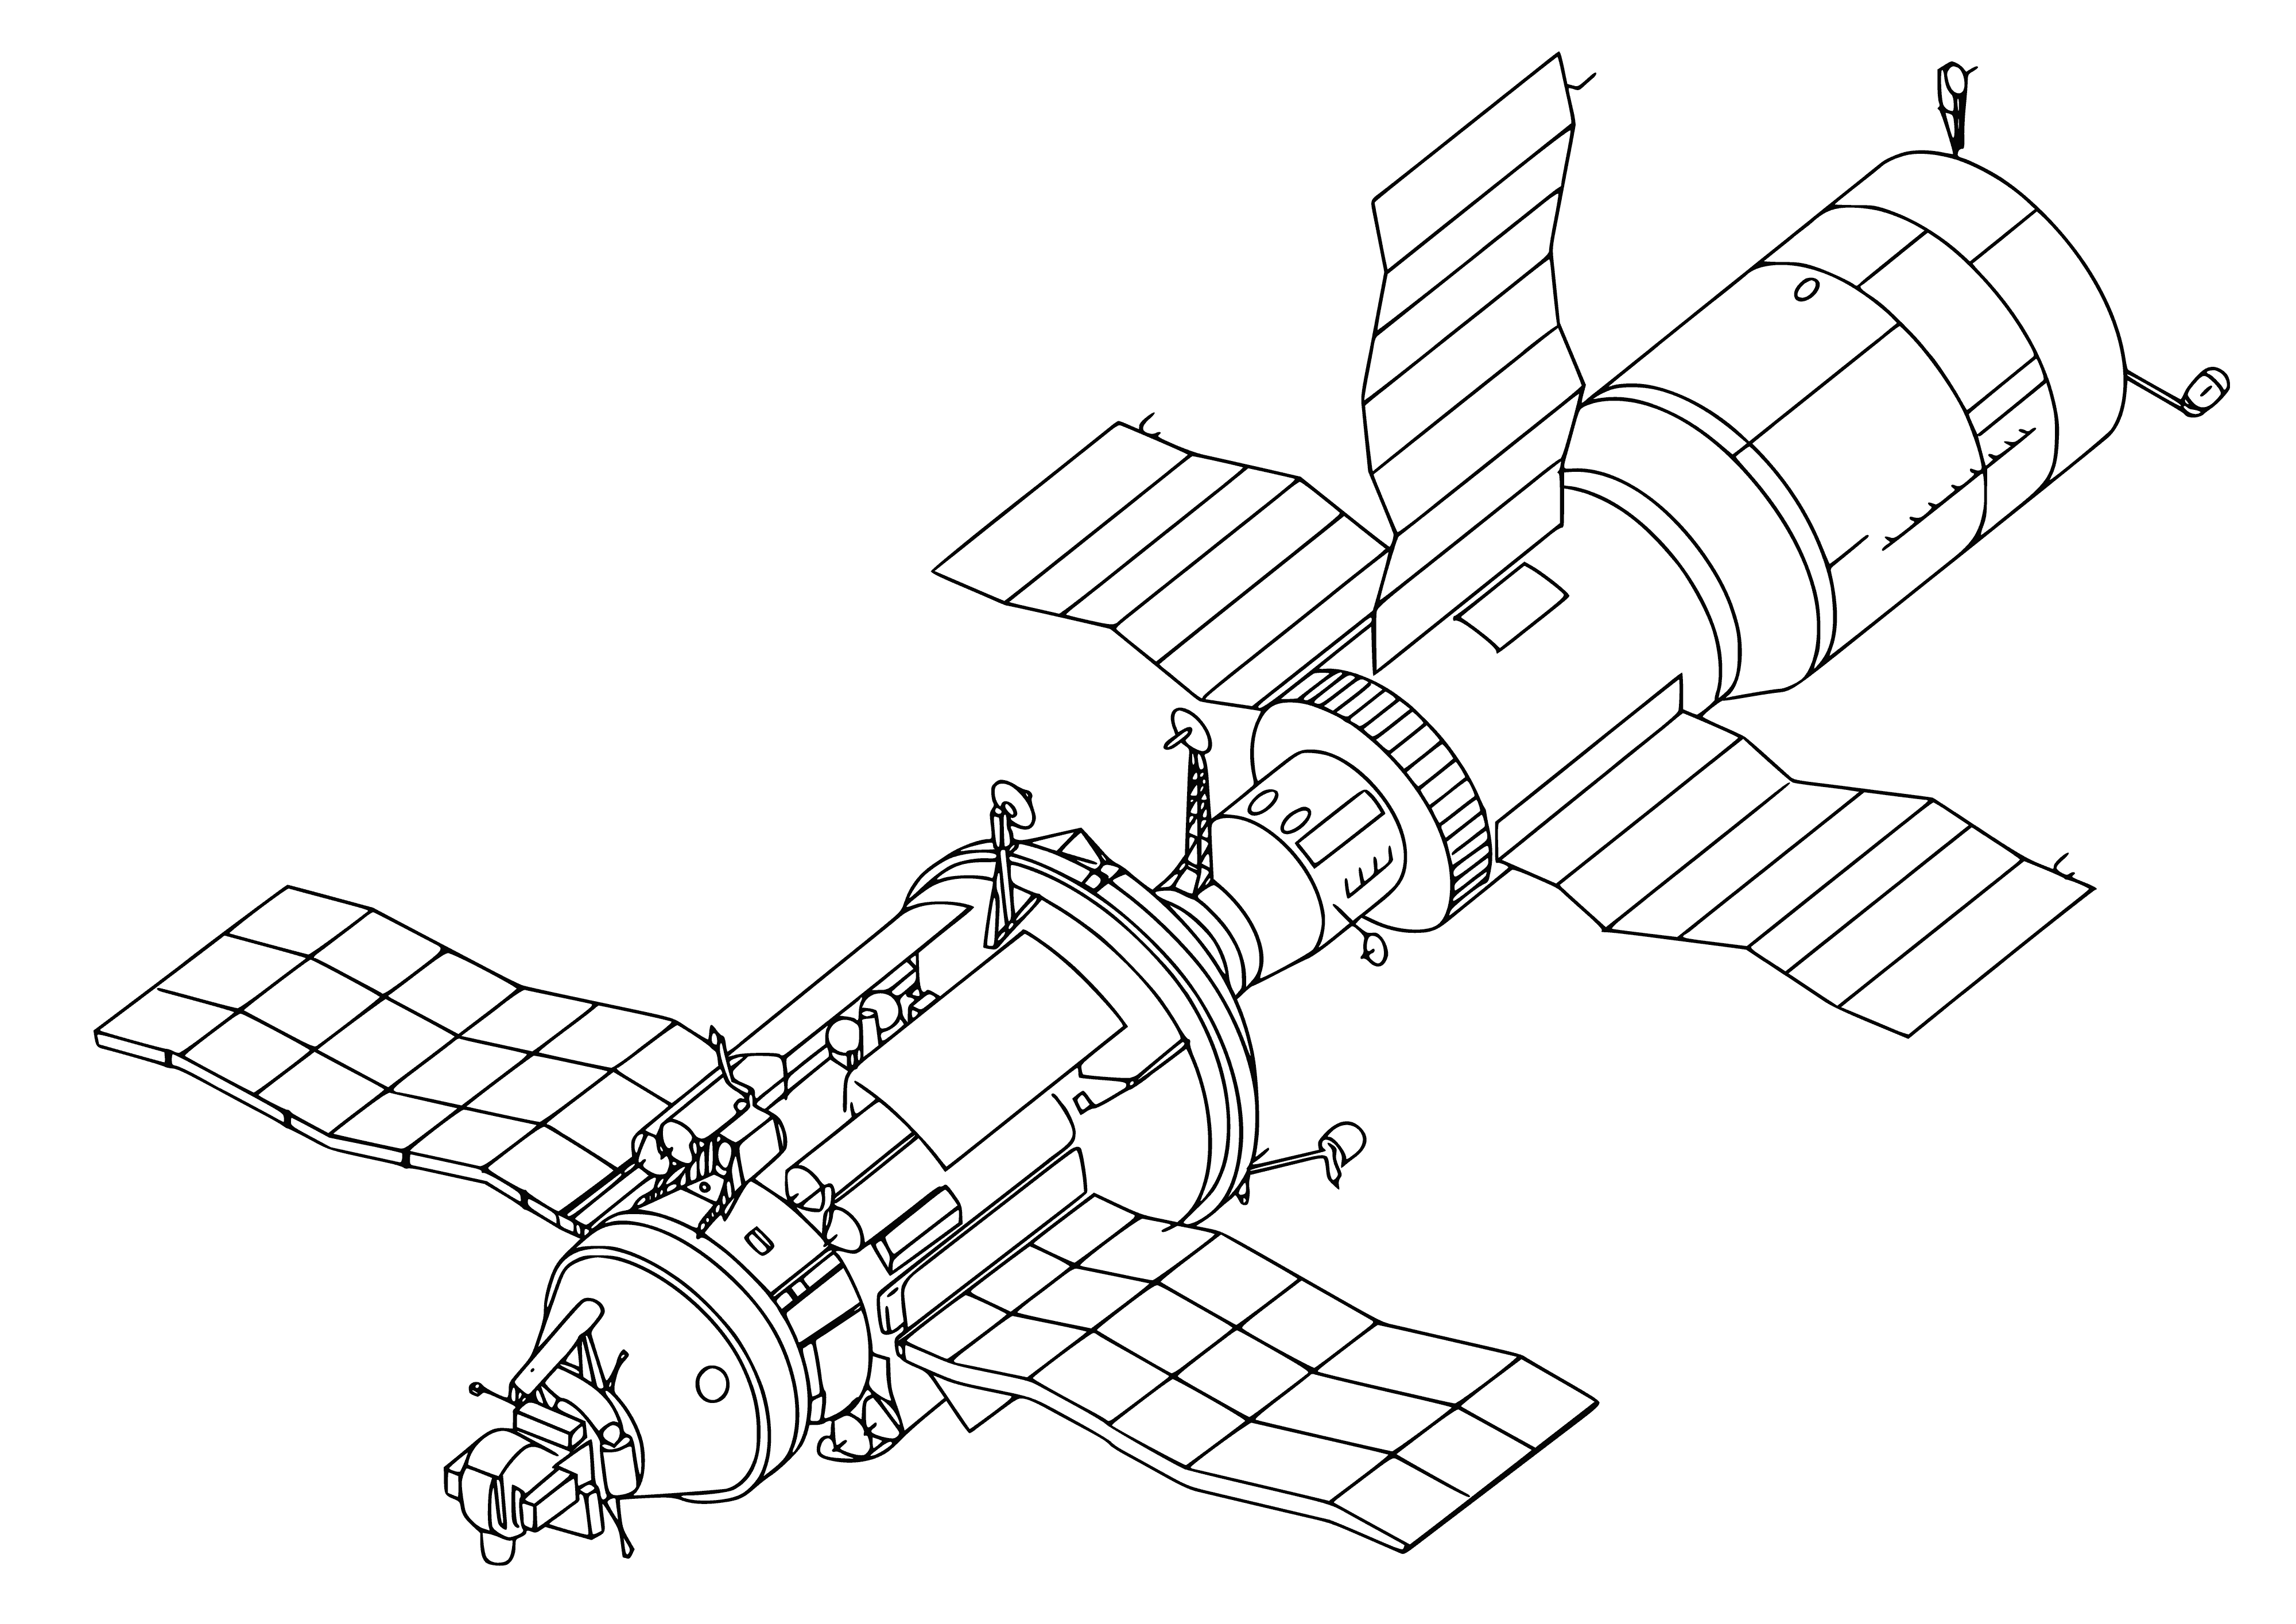 coloring page: Silver spheres connected by rods, orbiting a planet.